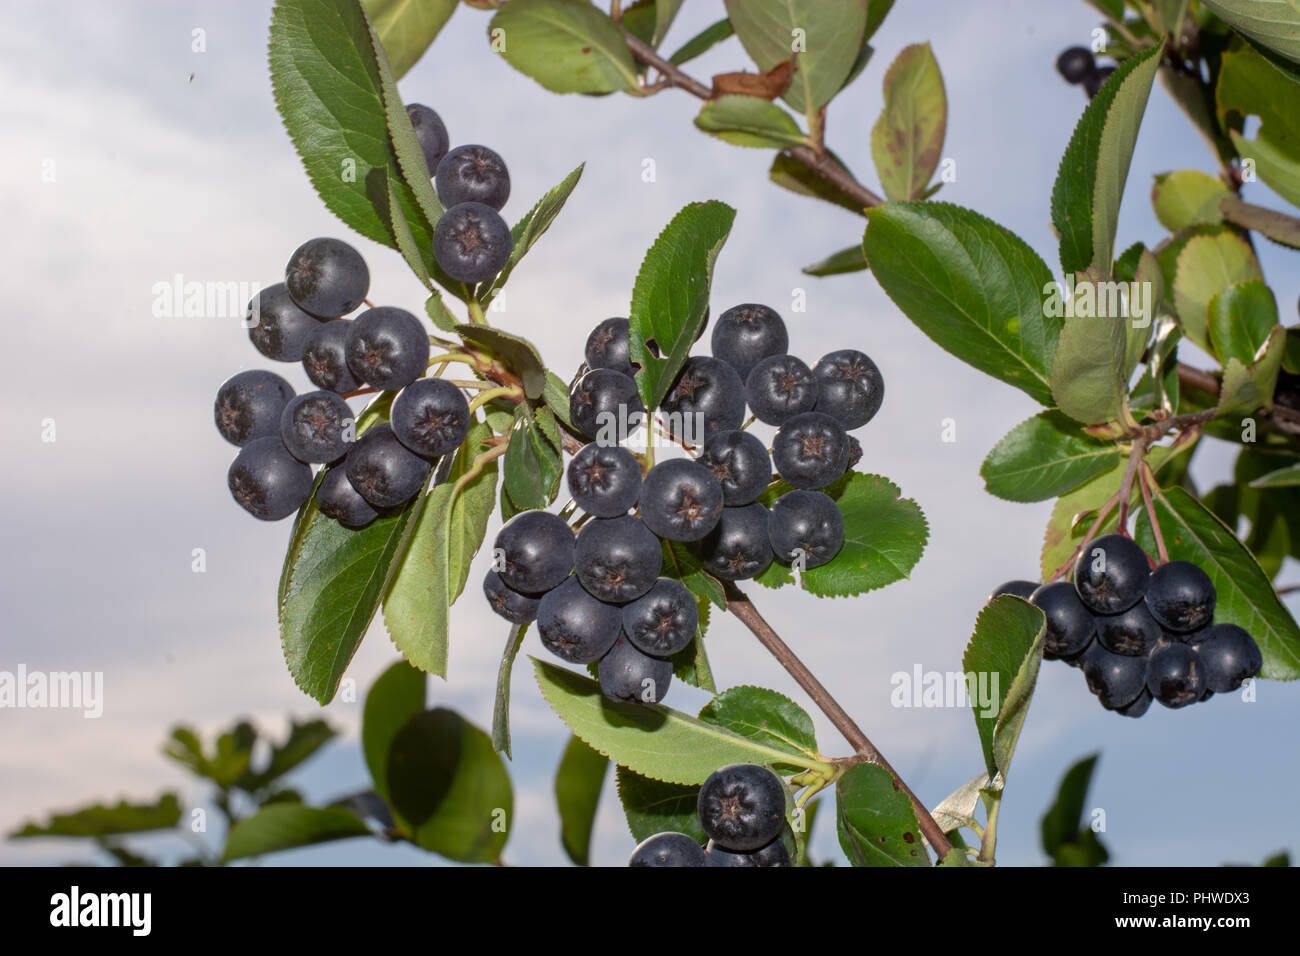 Branch filled with aronia berries. Stock Photo